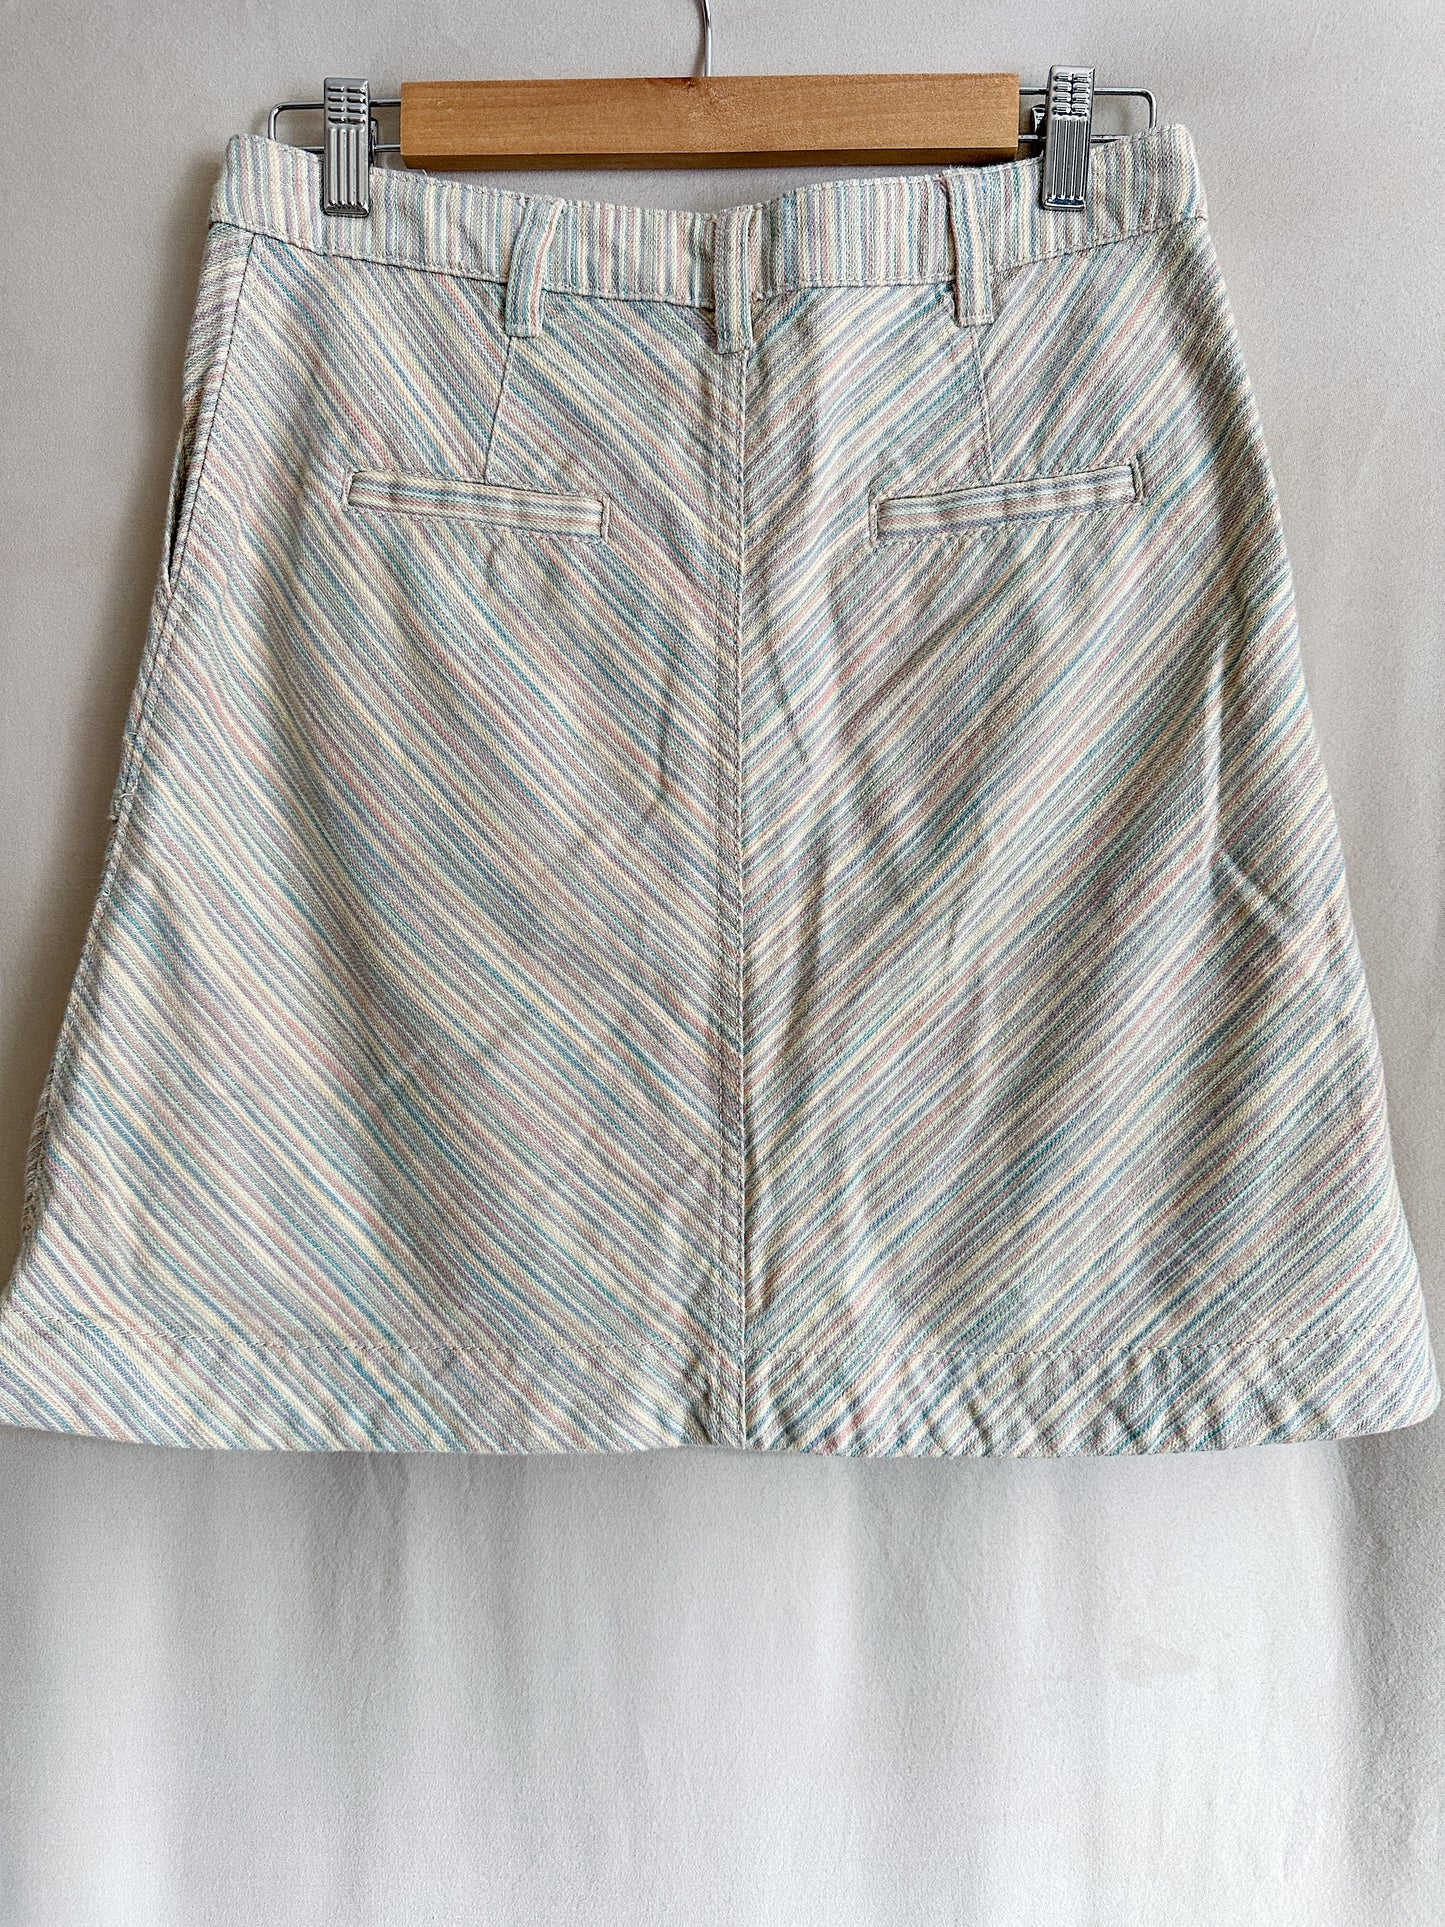 Anthropologie Button Front Striped Twill Skirt (fits size 6-8)